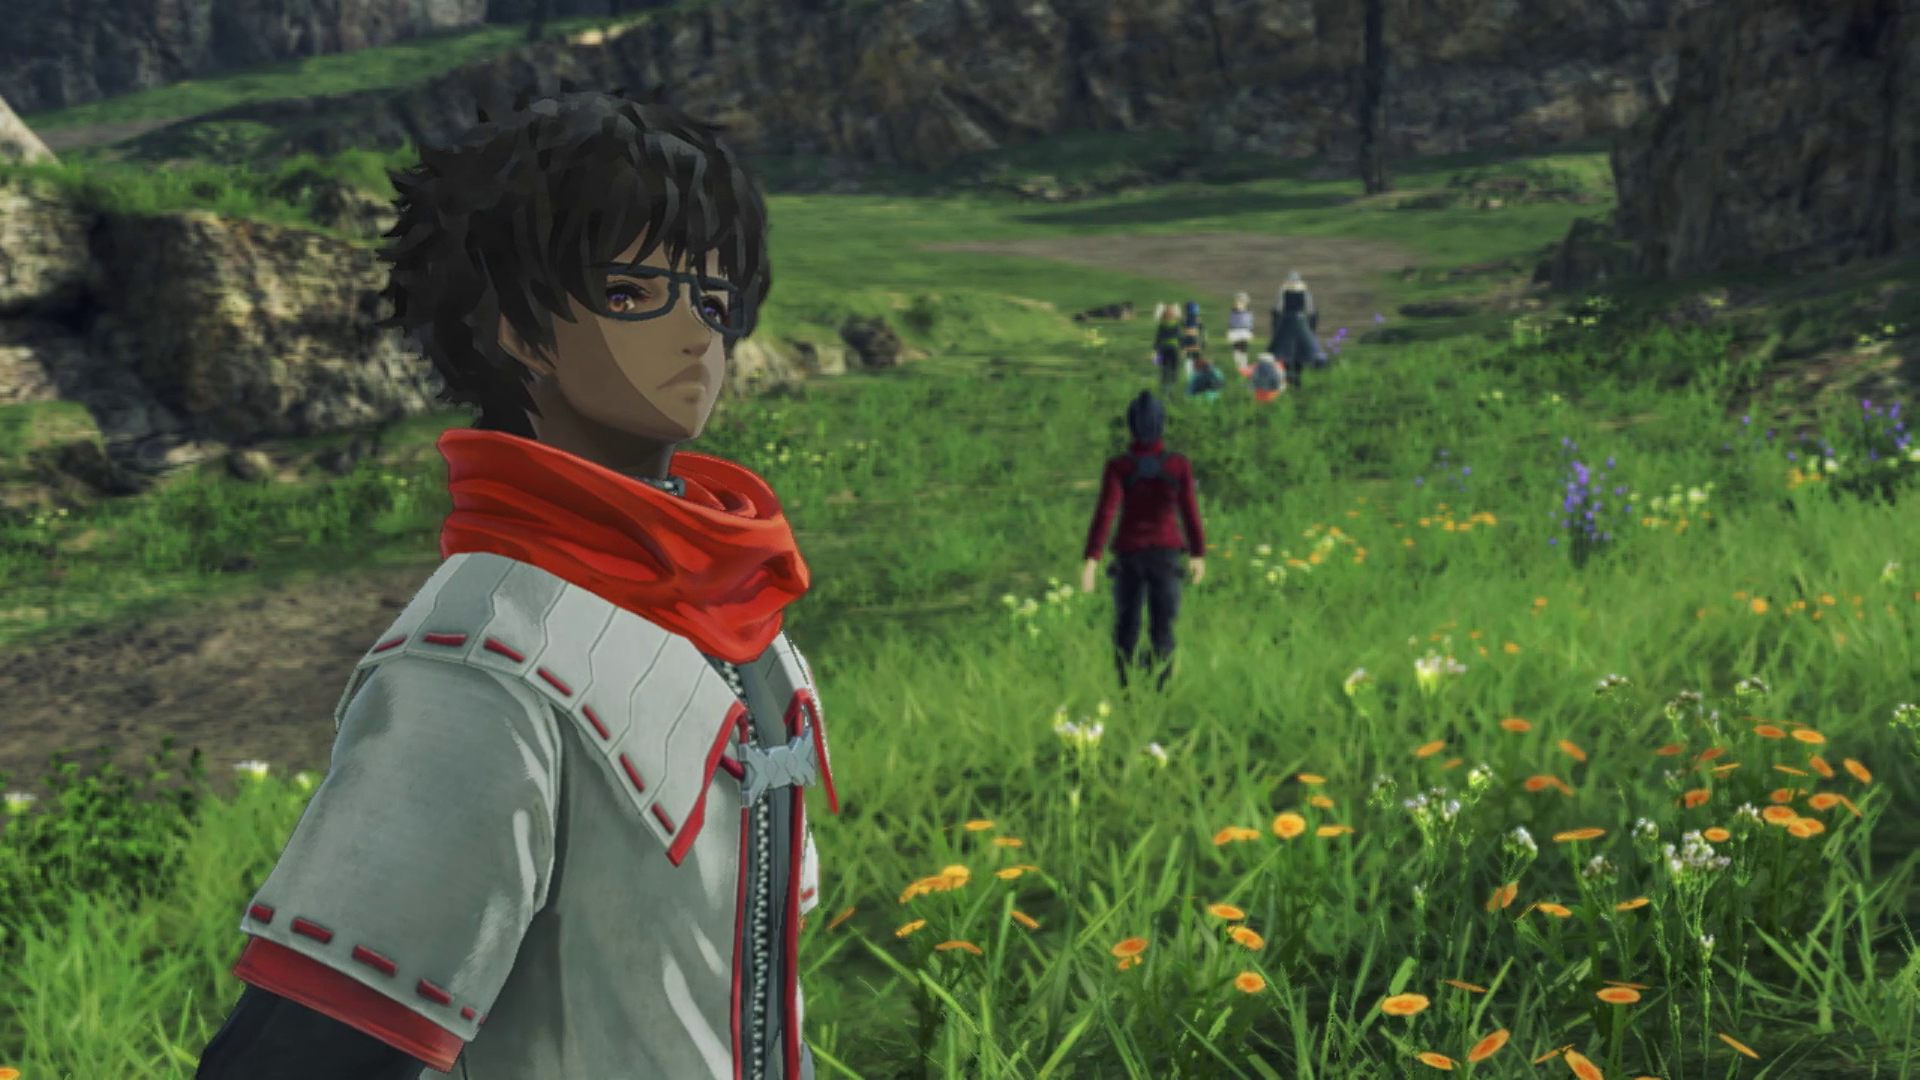 Xenoblade Chronicle 3’s Taion standing in a field with the party walking away behind him.